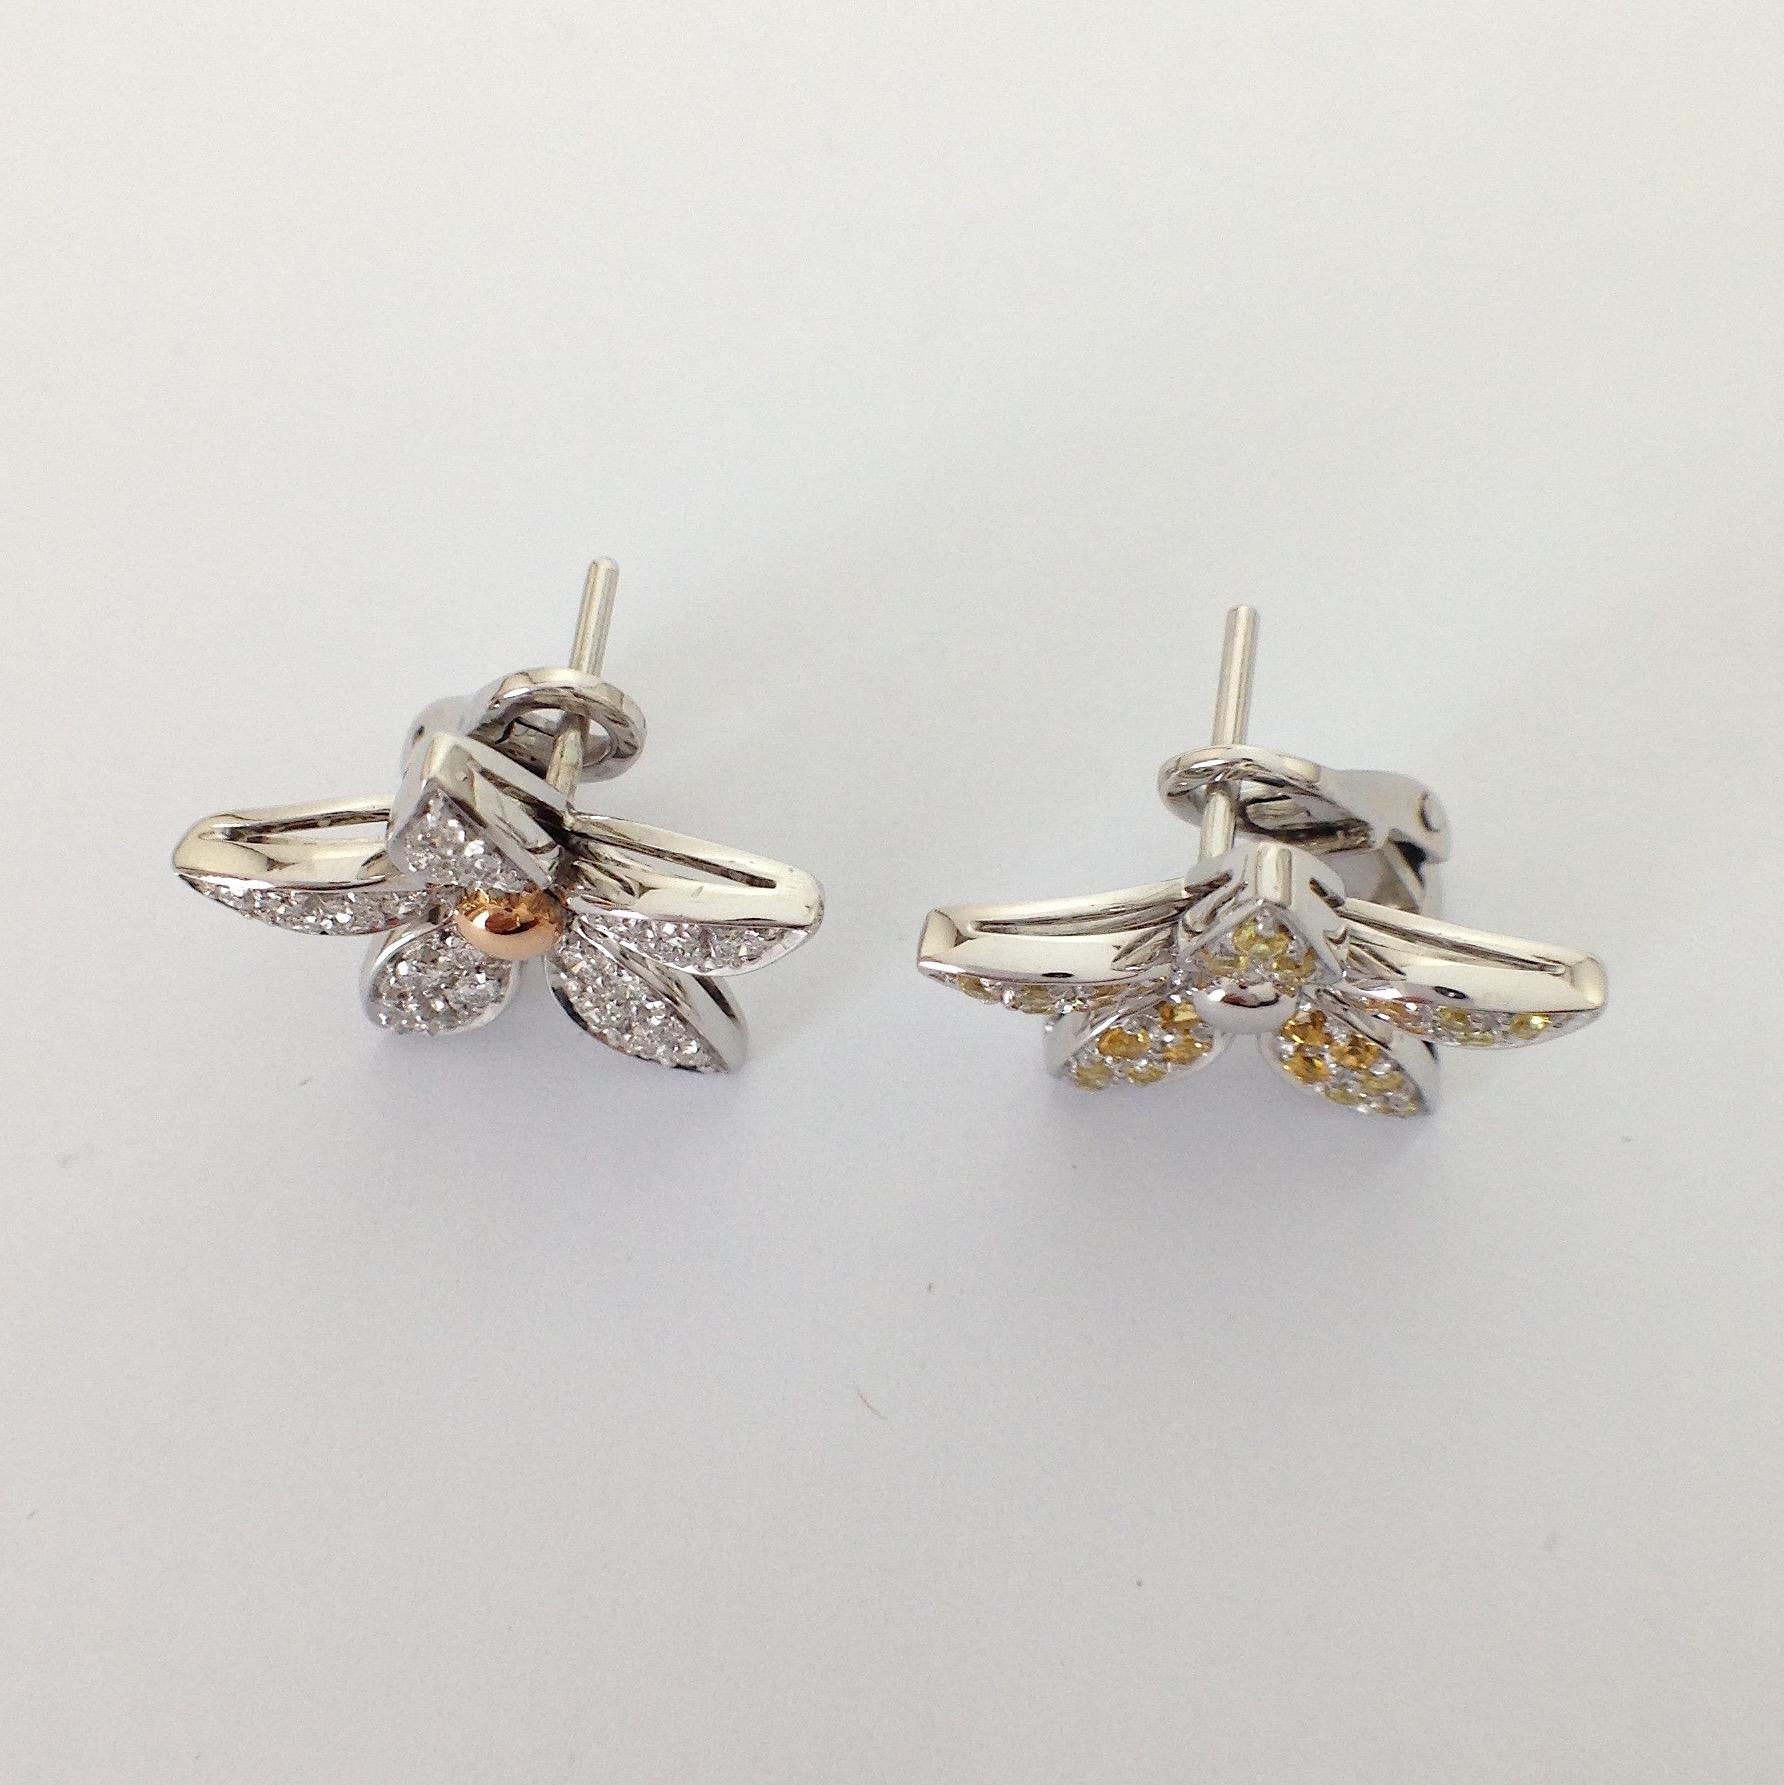 White Diamond Yellow Sapphire 18 Karat Gold Flower Stud Earrings Made in Italy In New Condition For Sale In Bussolengo, Verona